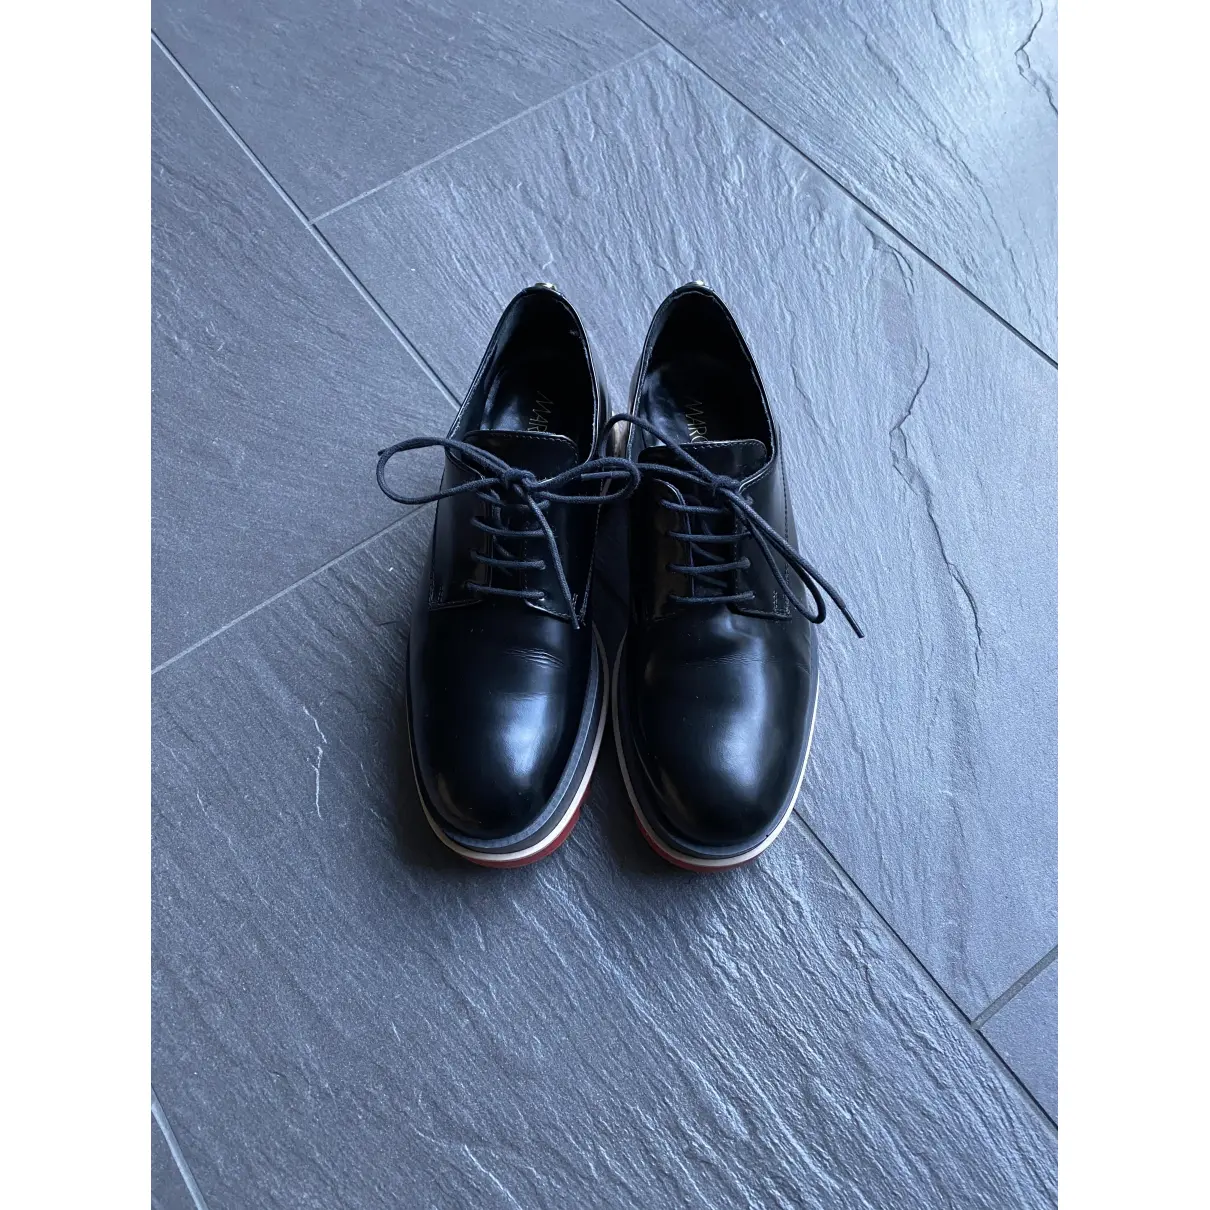 Buy Marc Cain Leather lace ups online